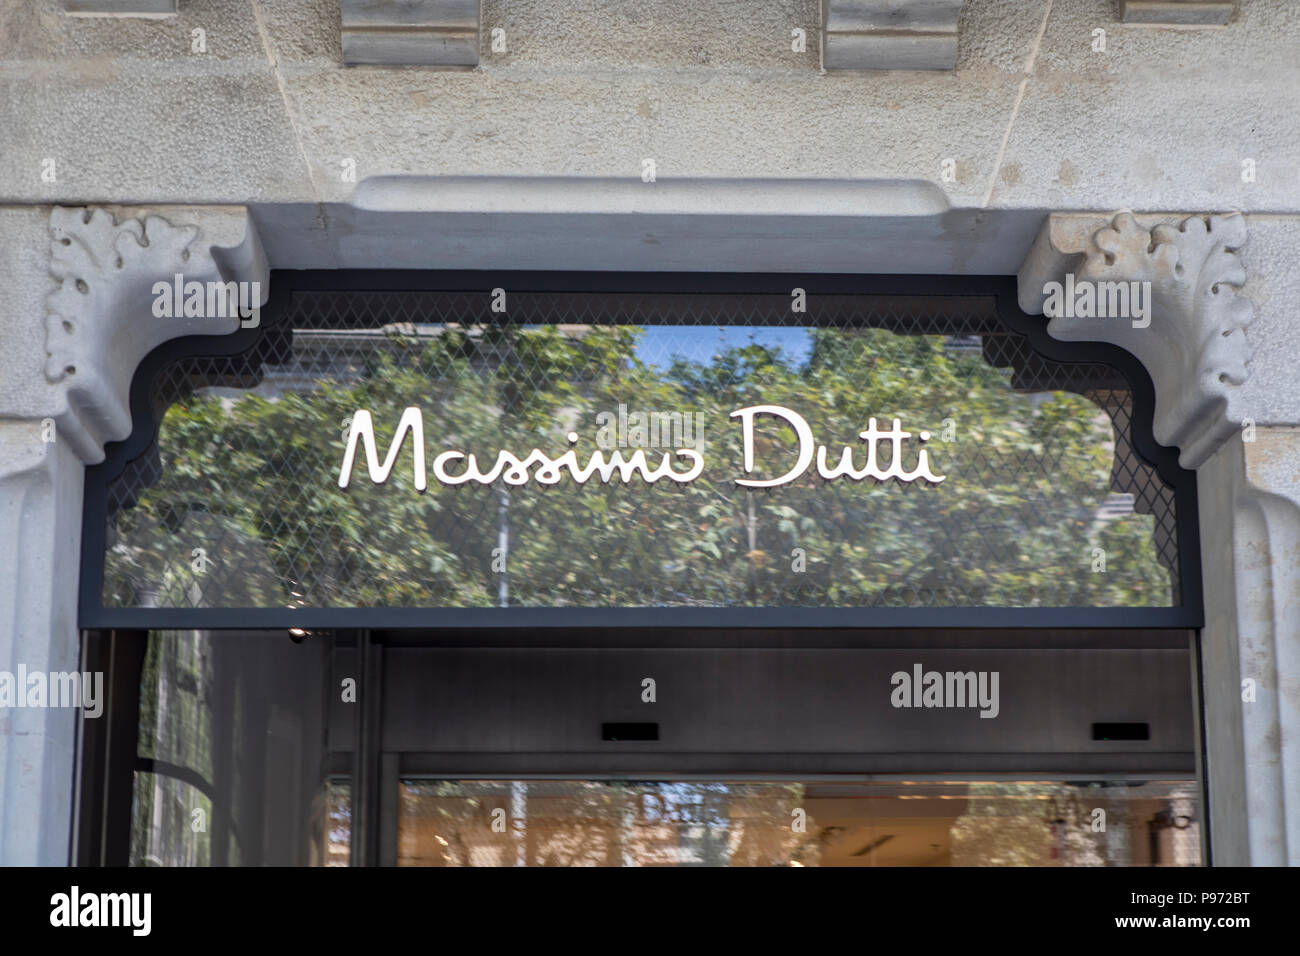 Massimo dutti hi-res stock photography and images - Alamy